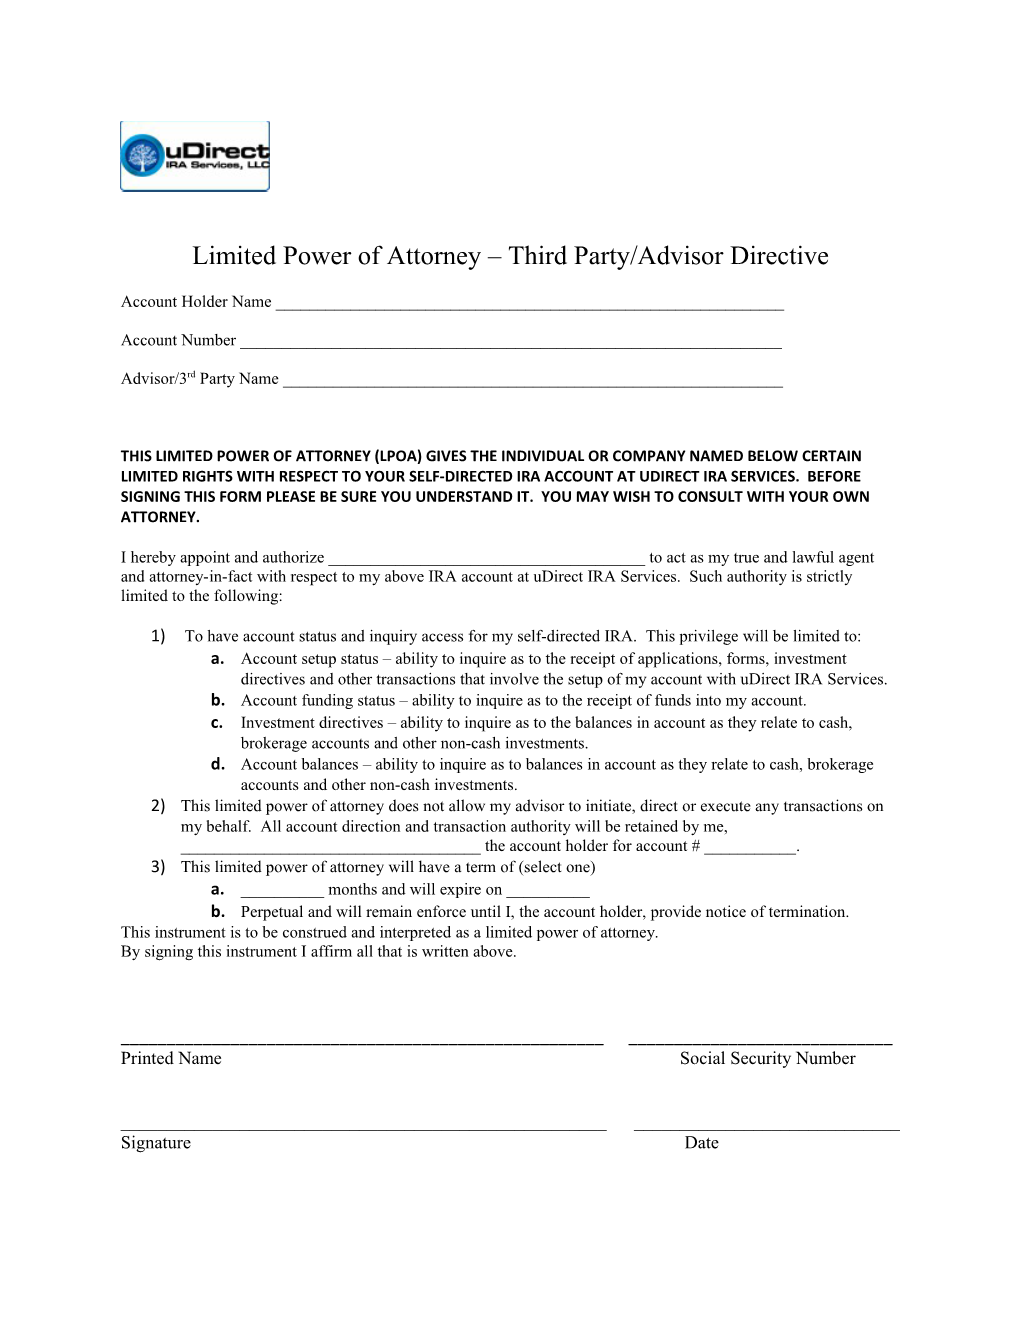 Limited Power of Attorney Third Party/Advisor Directive